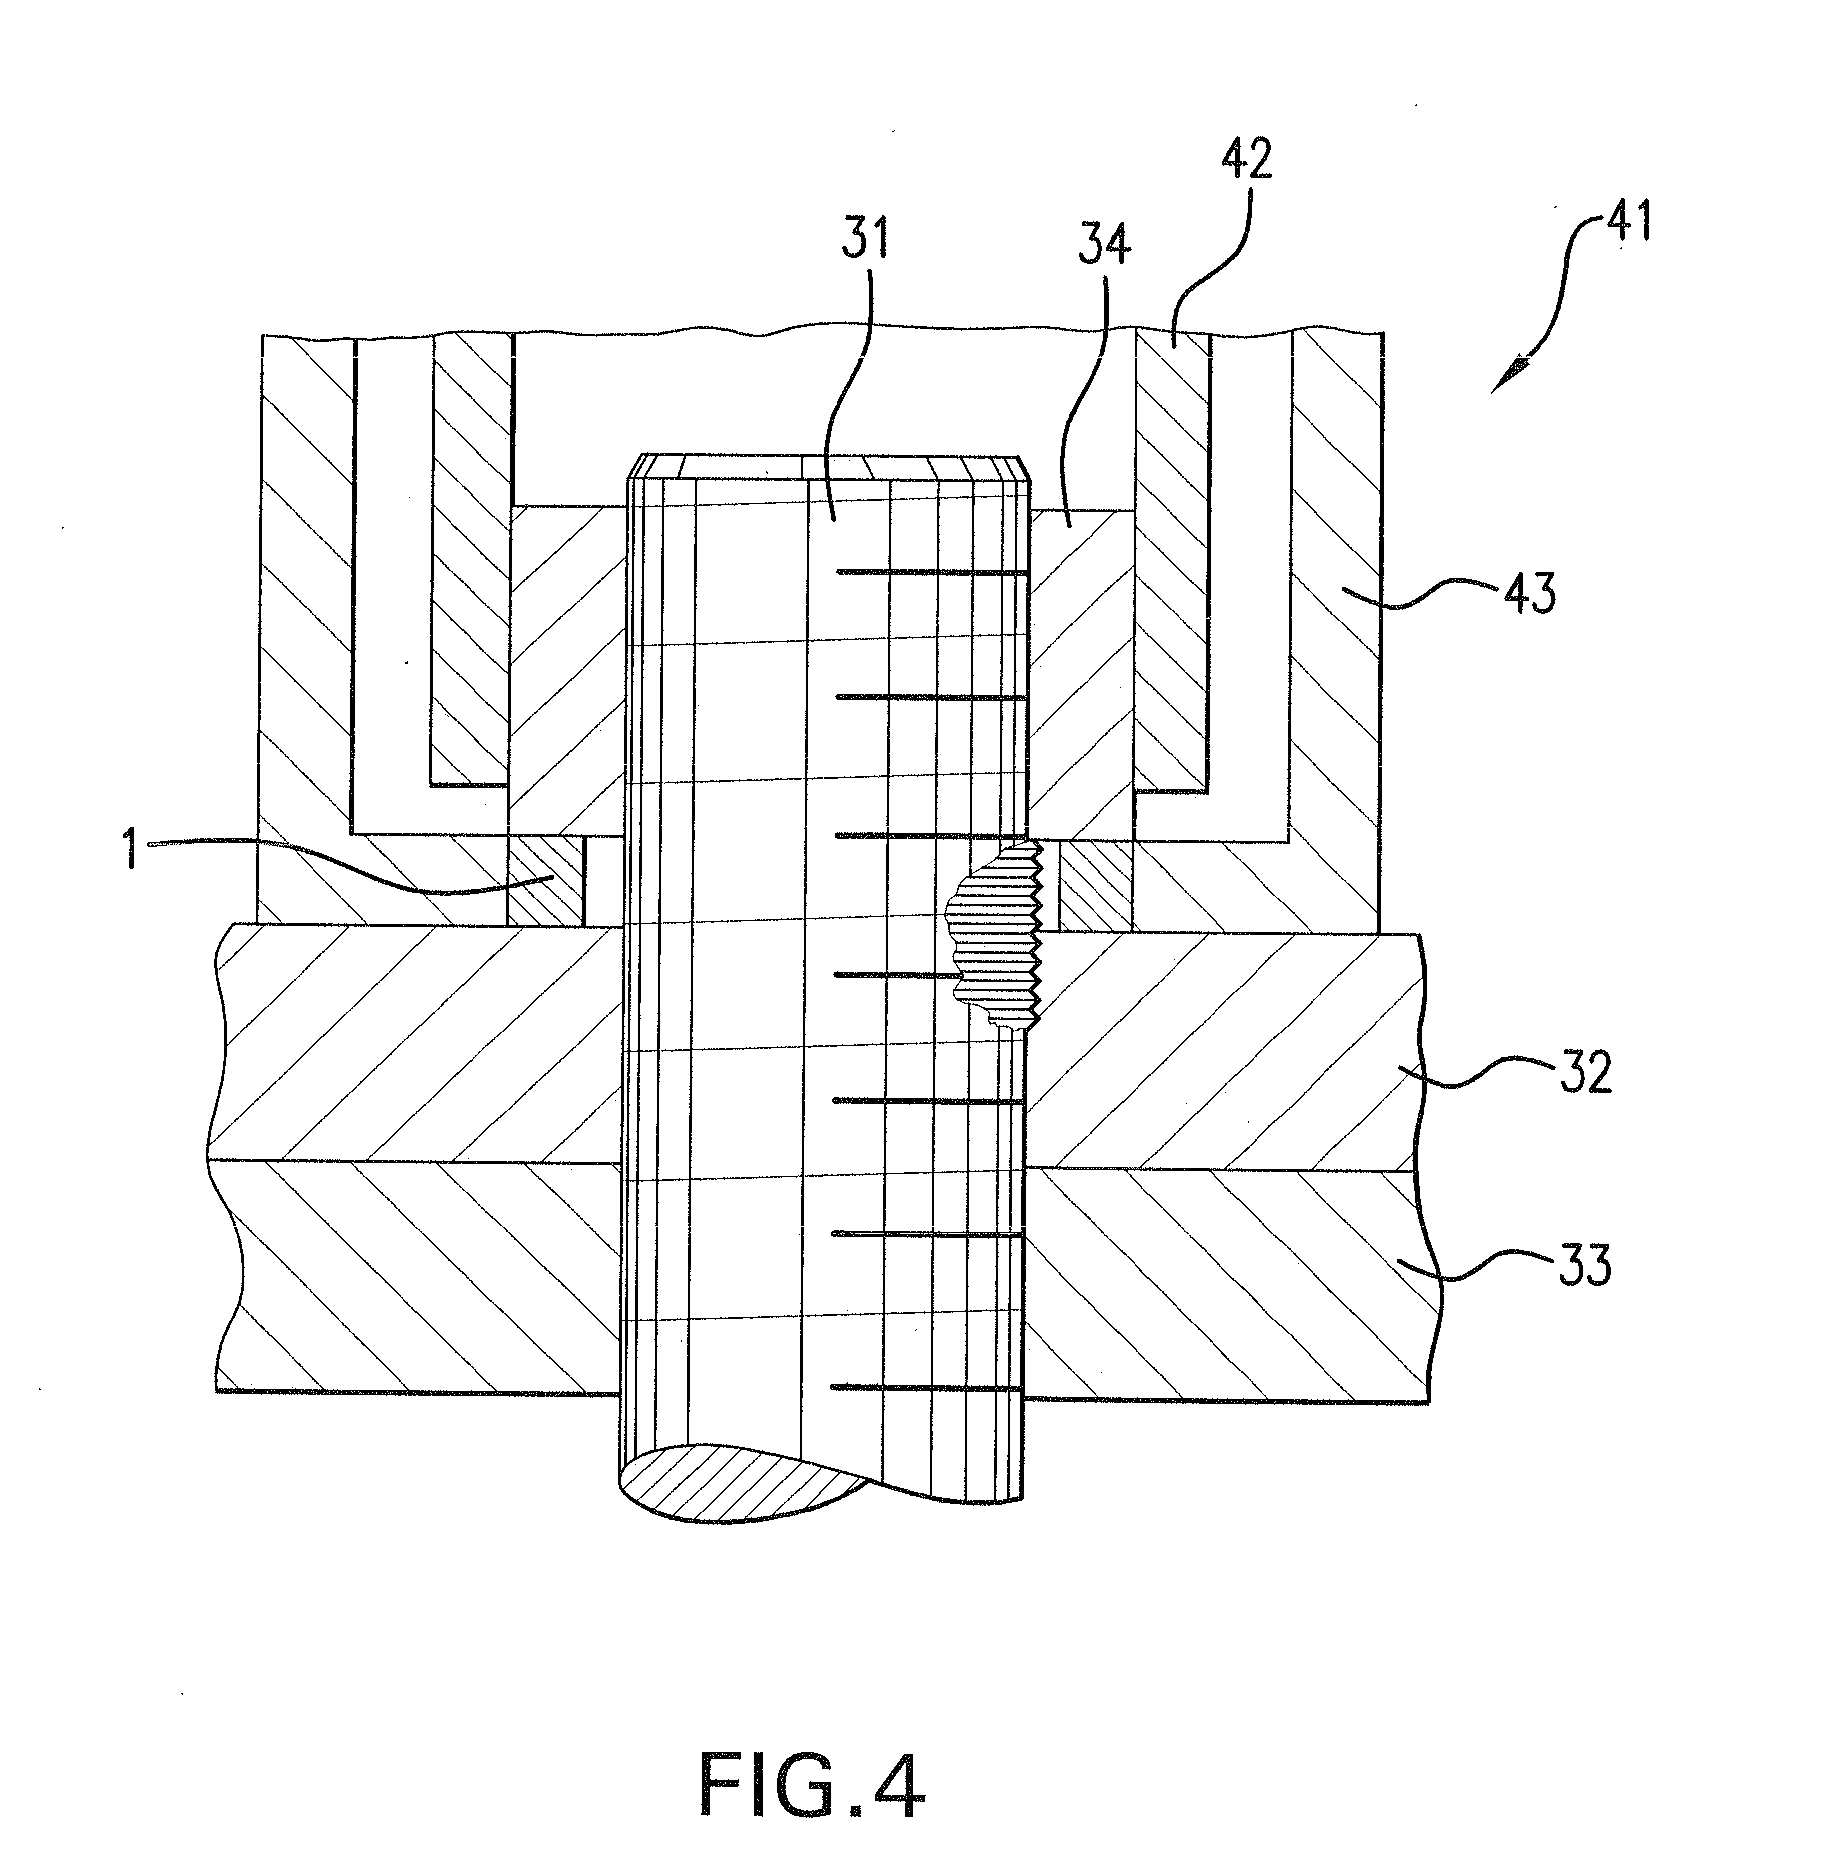 Method for tightening and loosening threaded connectors